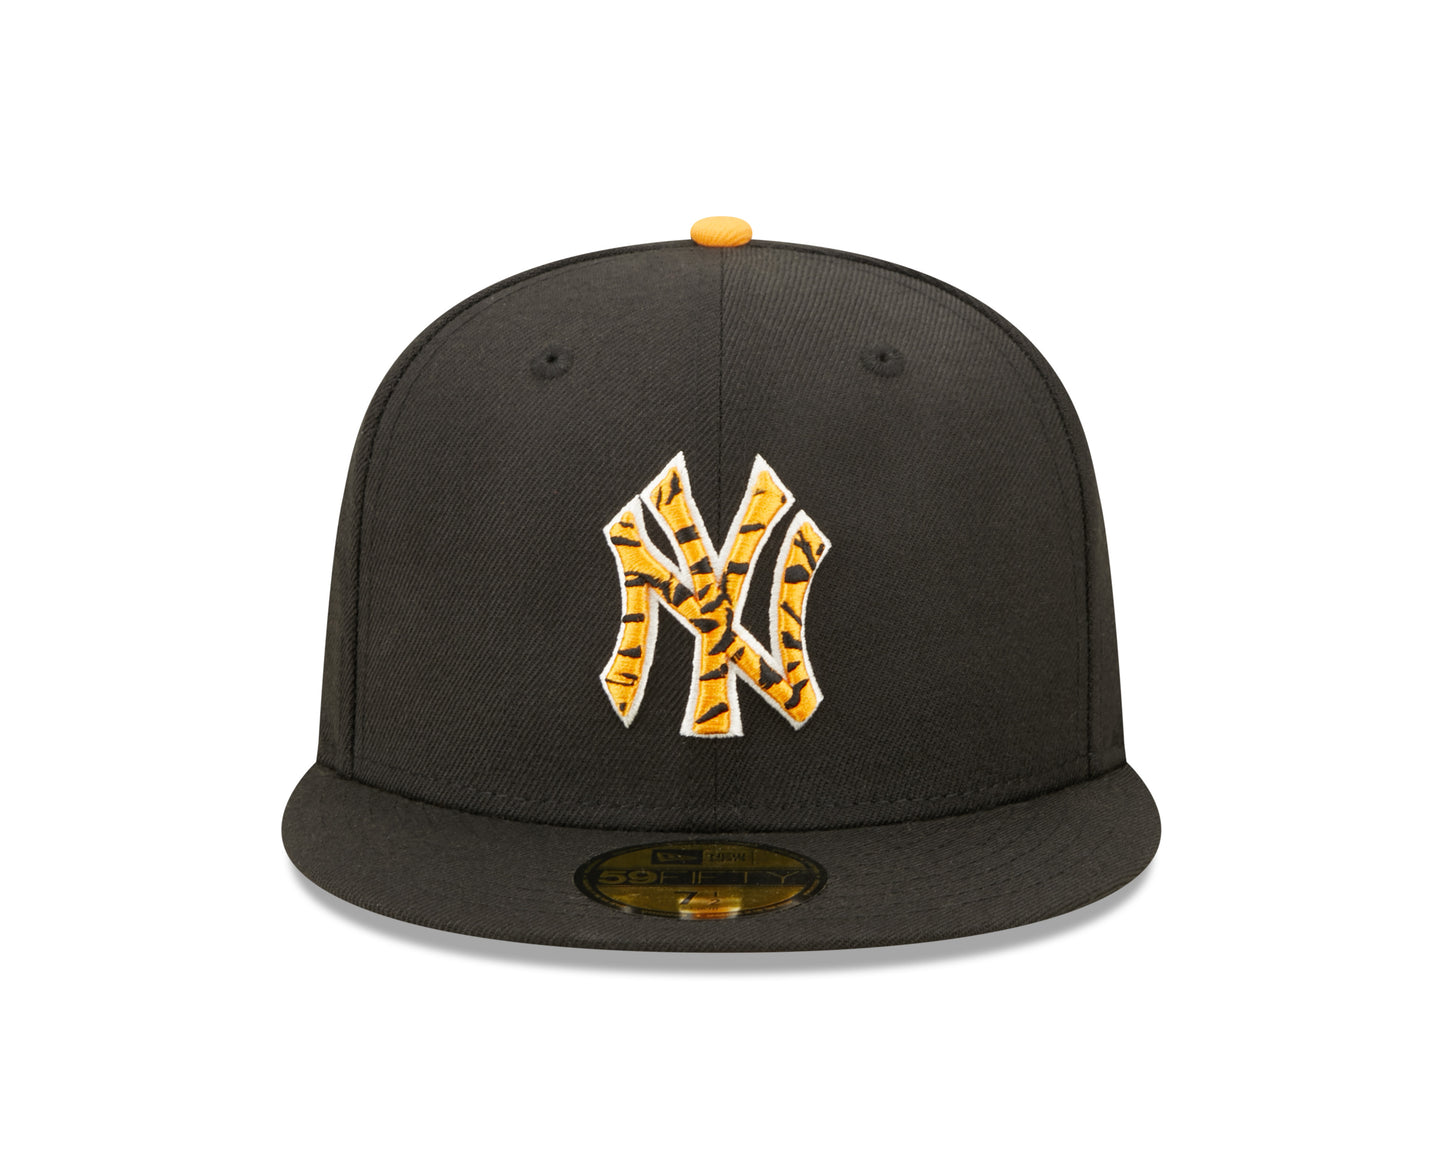 59Fifty Fitted Cap New York Yankees Tigerfill - Black - Headz Up 